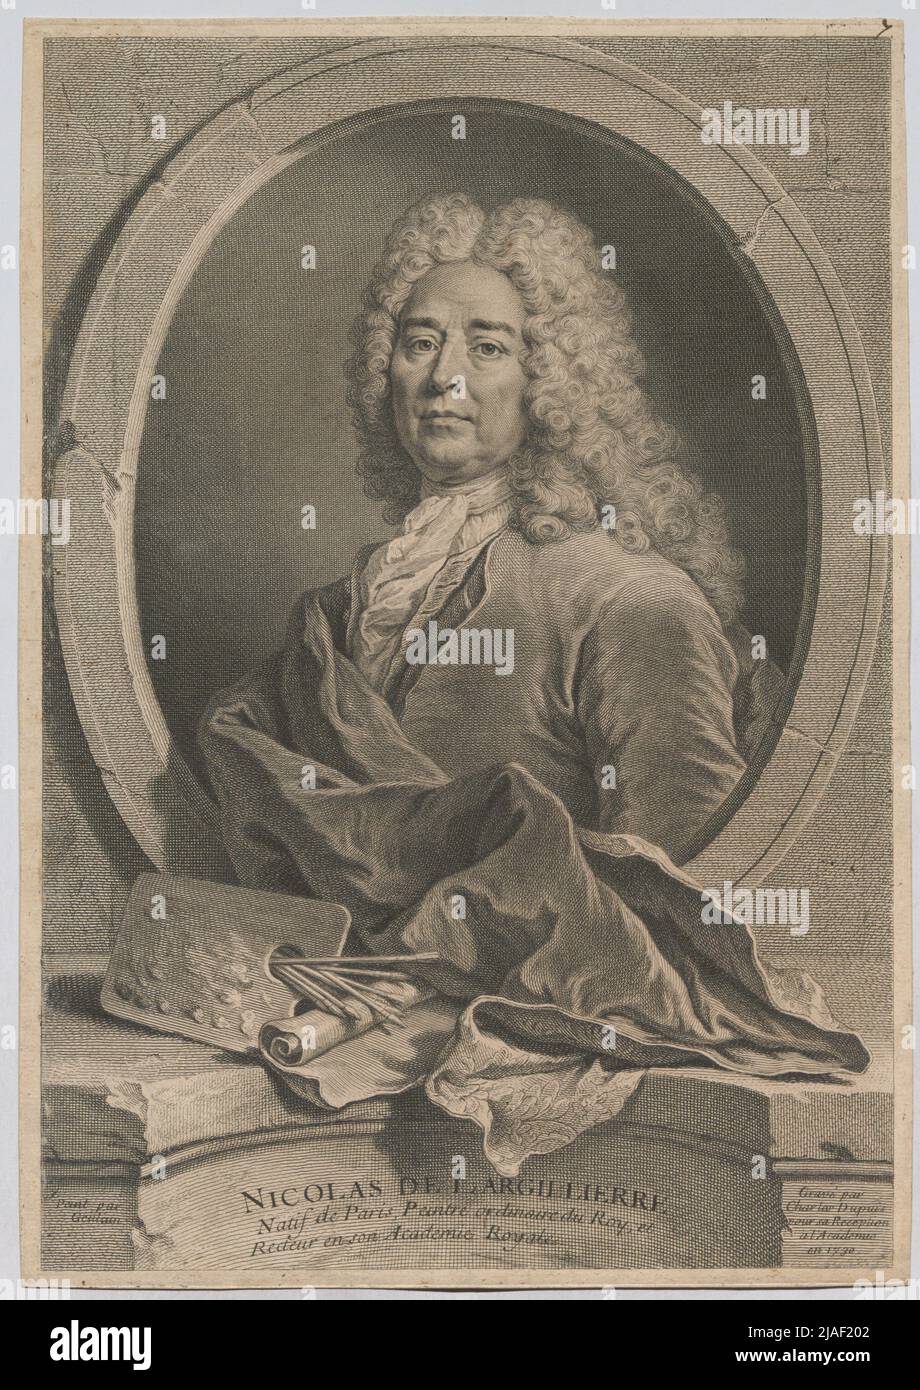 Nicolas de Largillierre native of Paris, ordinary painter of Roy, and rector in his royal academy. '. Nicolas de Largillière, Hofmaler, sayktor der parrisemie. Charles Etienne Geuslin (* 1685), Artist, Charles Dupuis (1685—1742), Copper Engraver Stock Photo